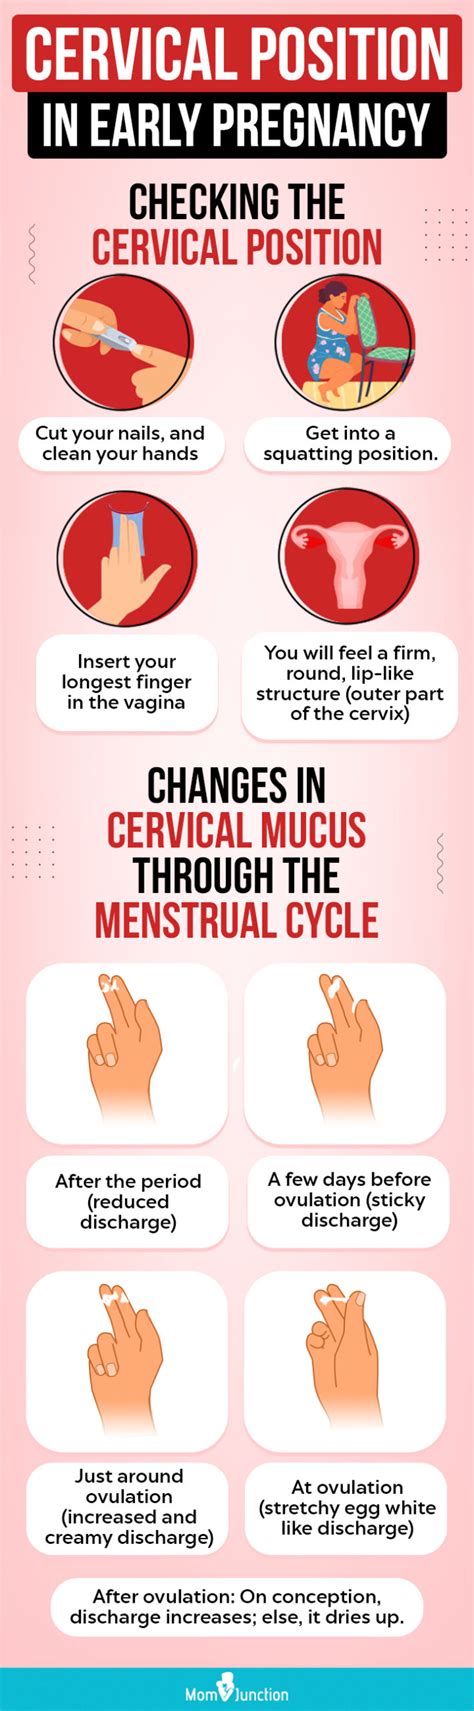 Early Pregnancy Cervical Mucus Pictures